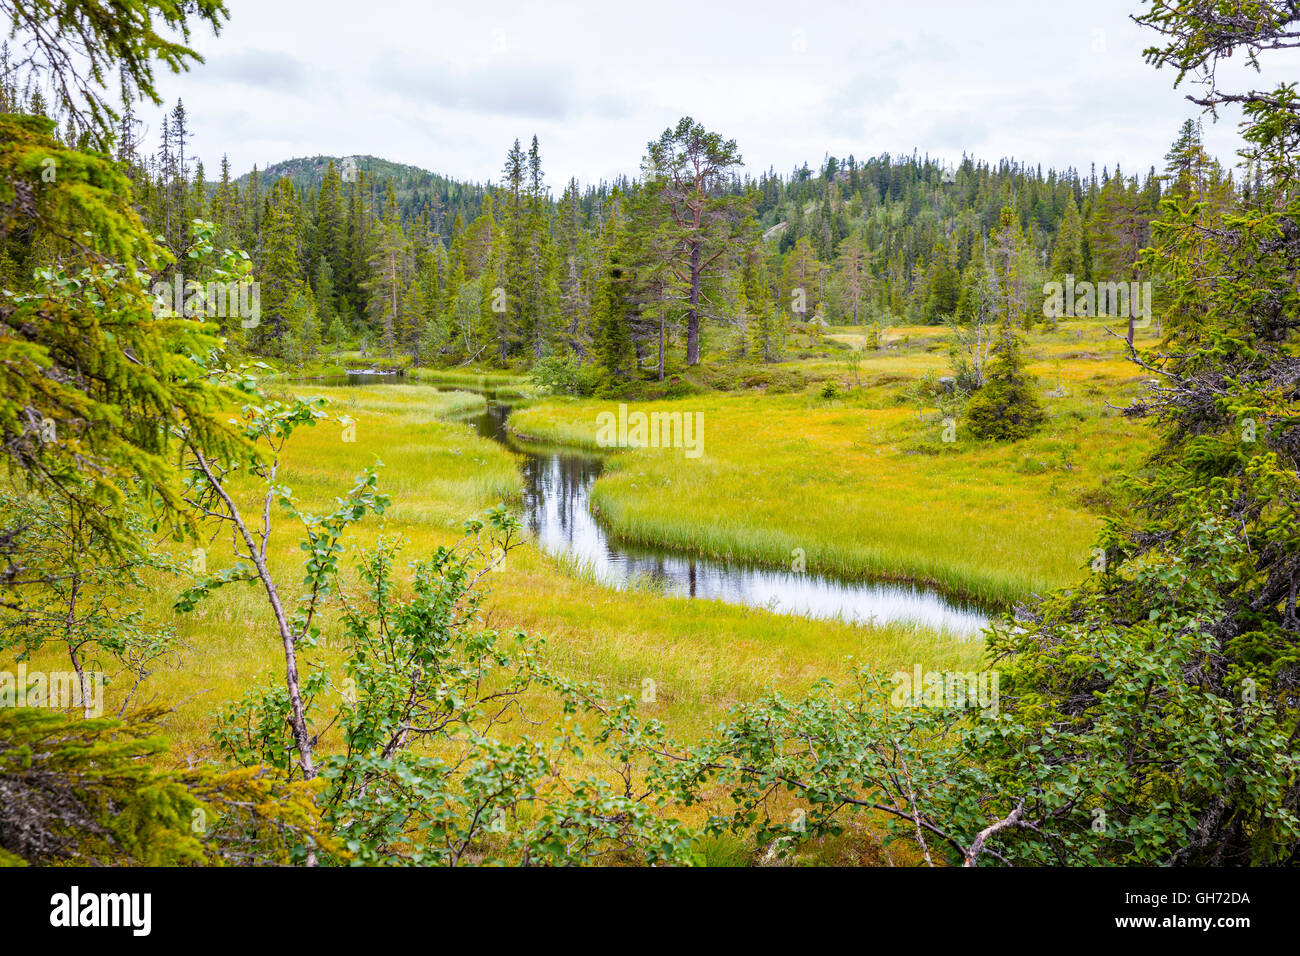 Wild and untouched forest in the high moutains of Norway Stock Photo